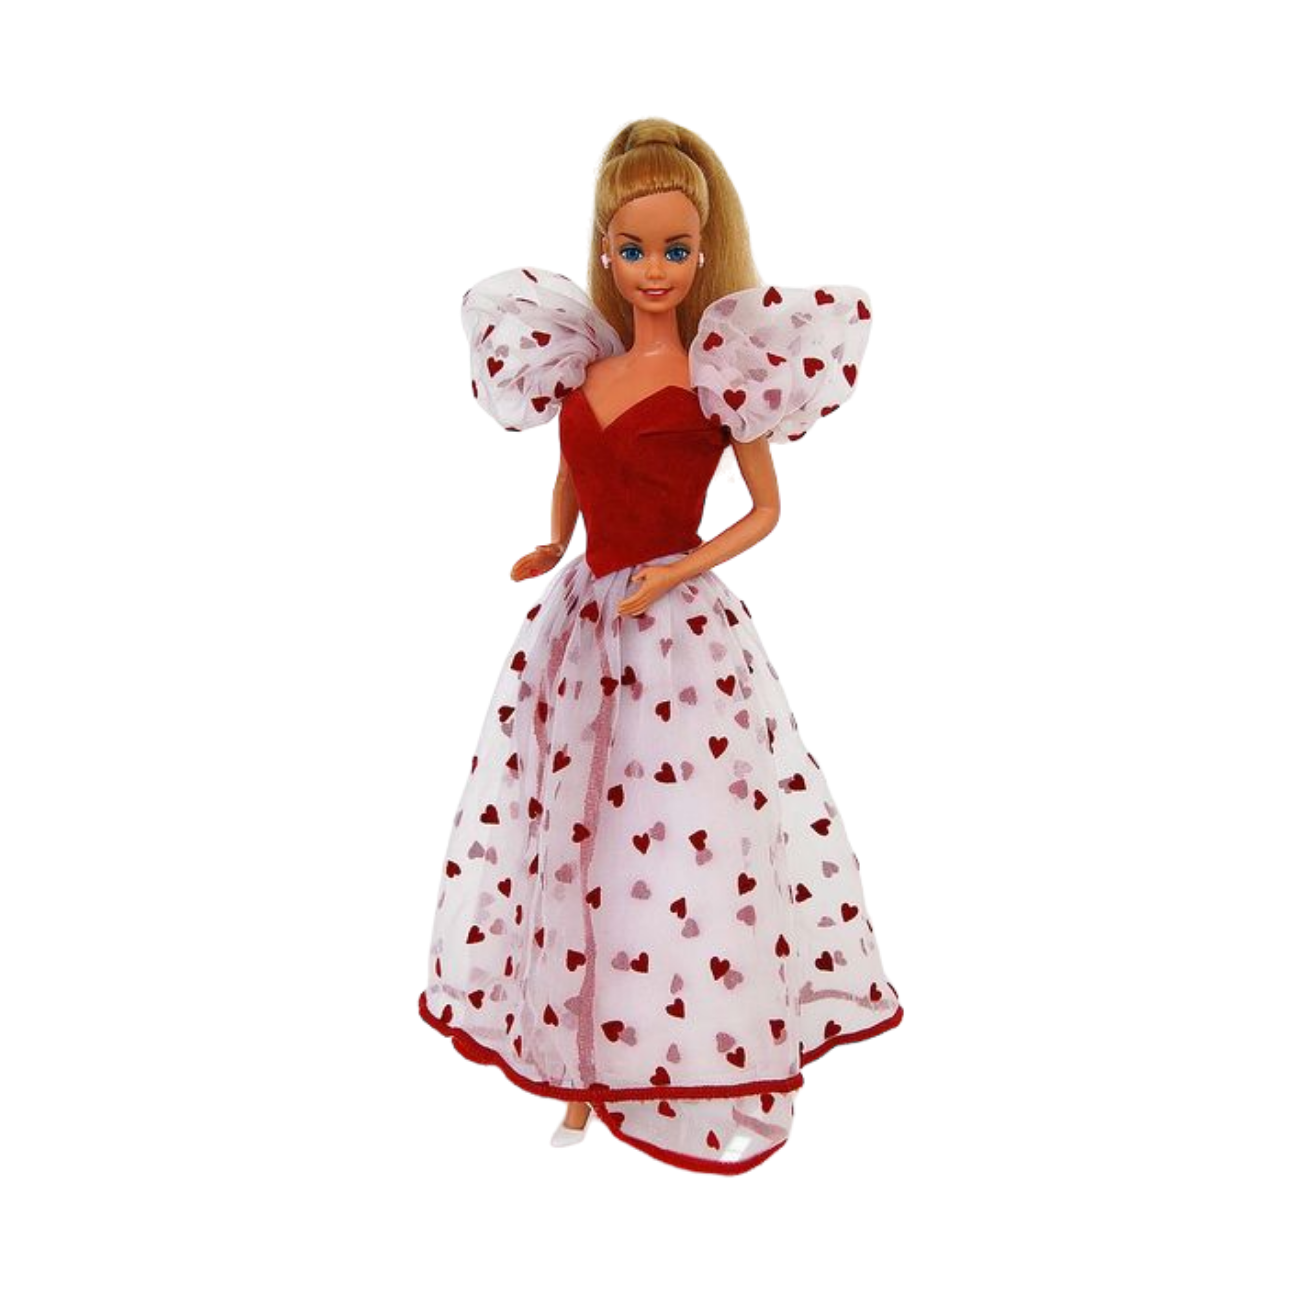 Loving You Barbie doll wearing a red sweetheart neckline dress with white tulle sleeves and skirt with mini heart detail